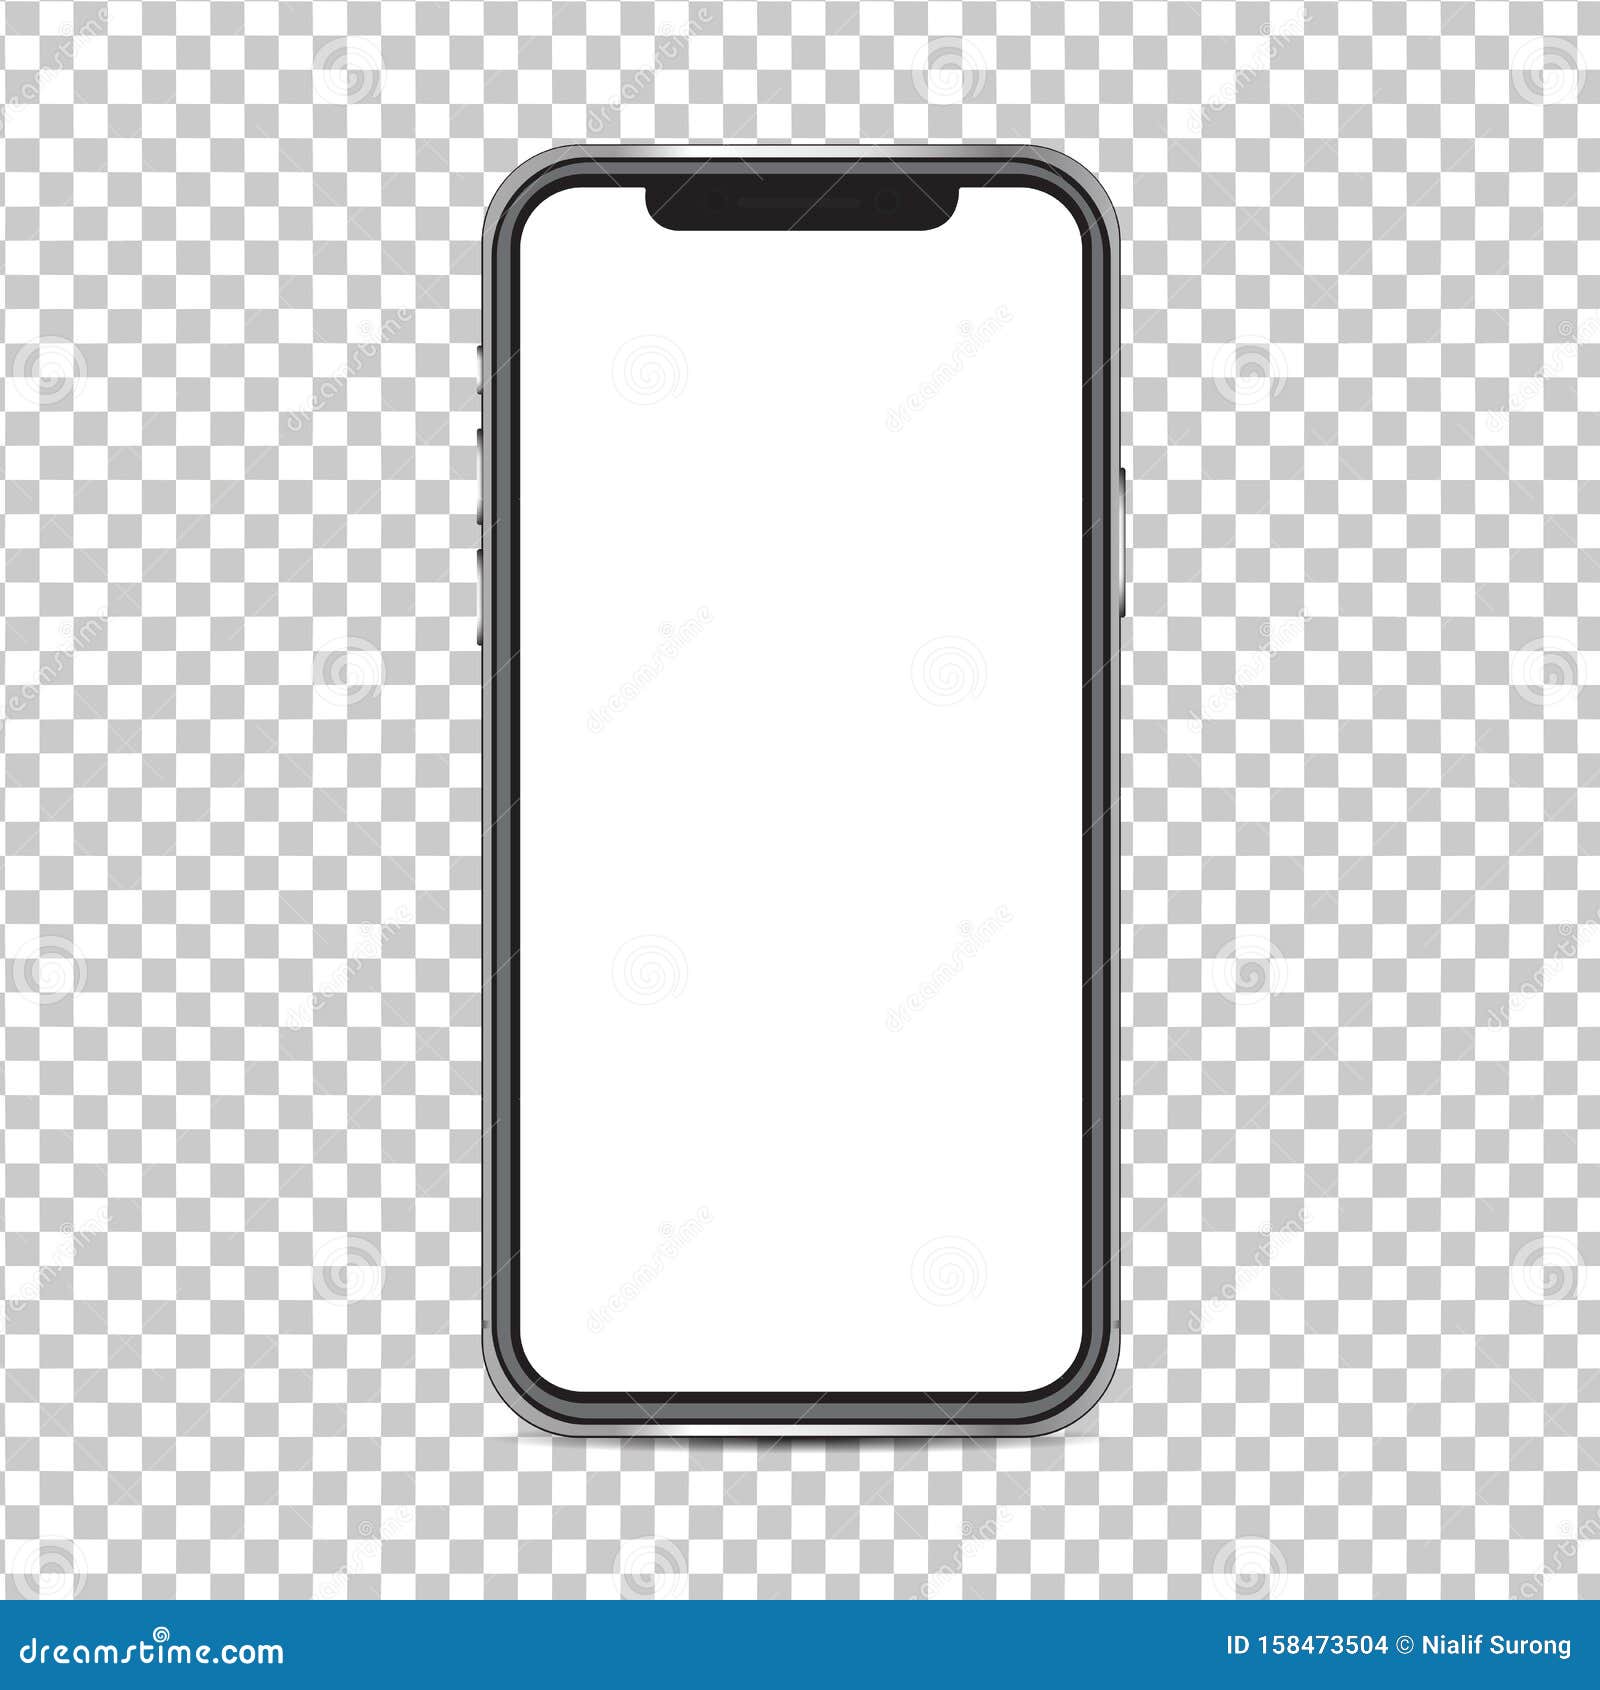 Iphone Png Stock Illustrations – 103 Iphone Png Stock Illustrations,  Vectors & Clipart - Dreamstime